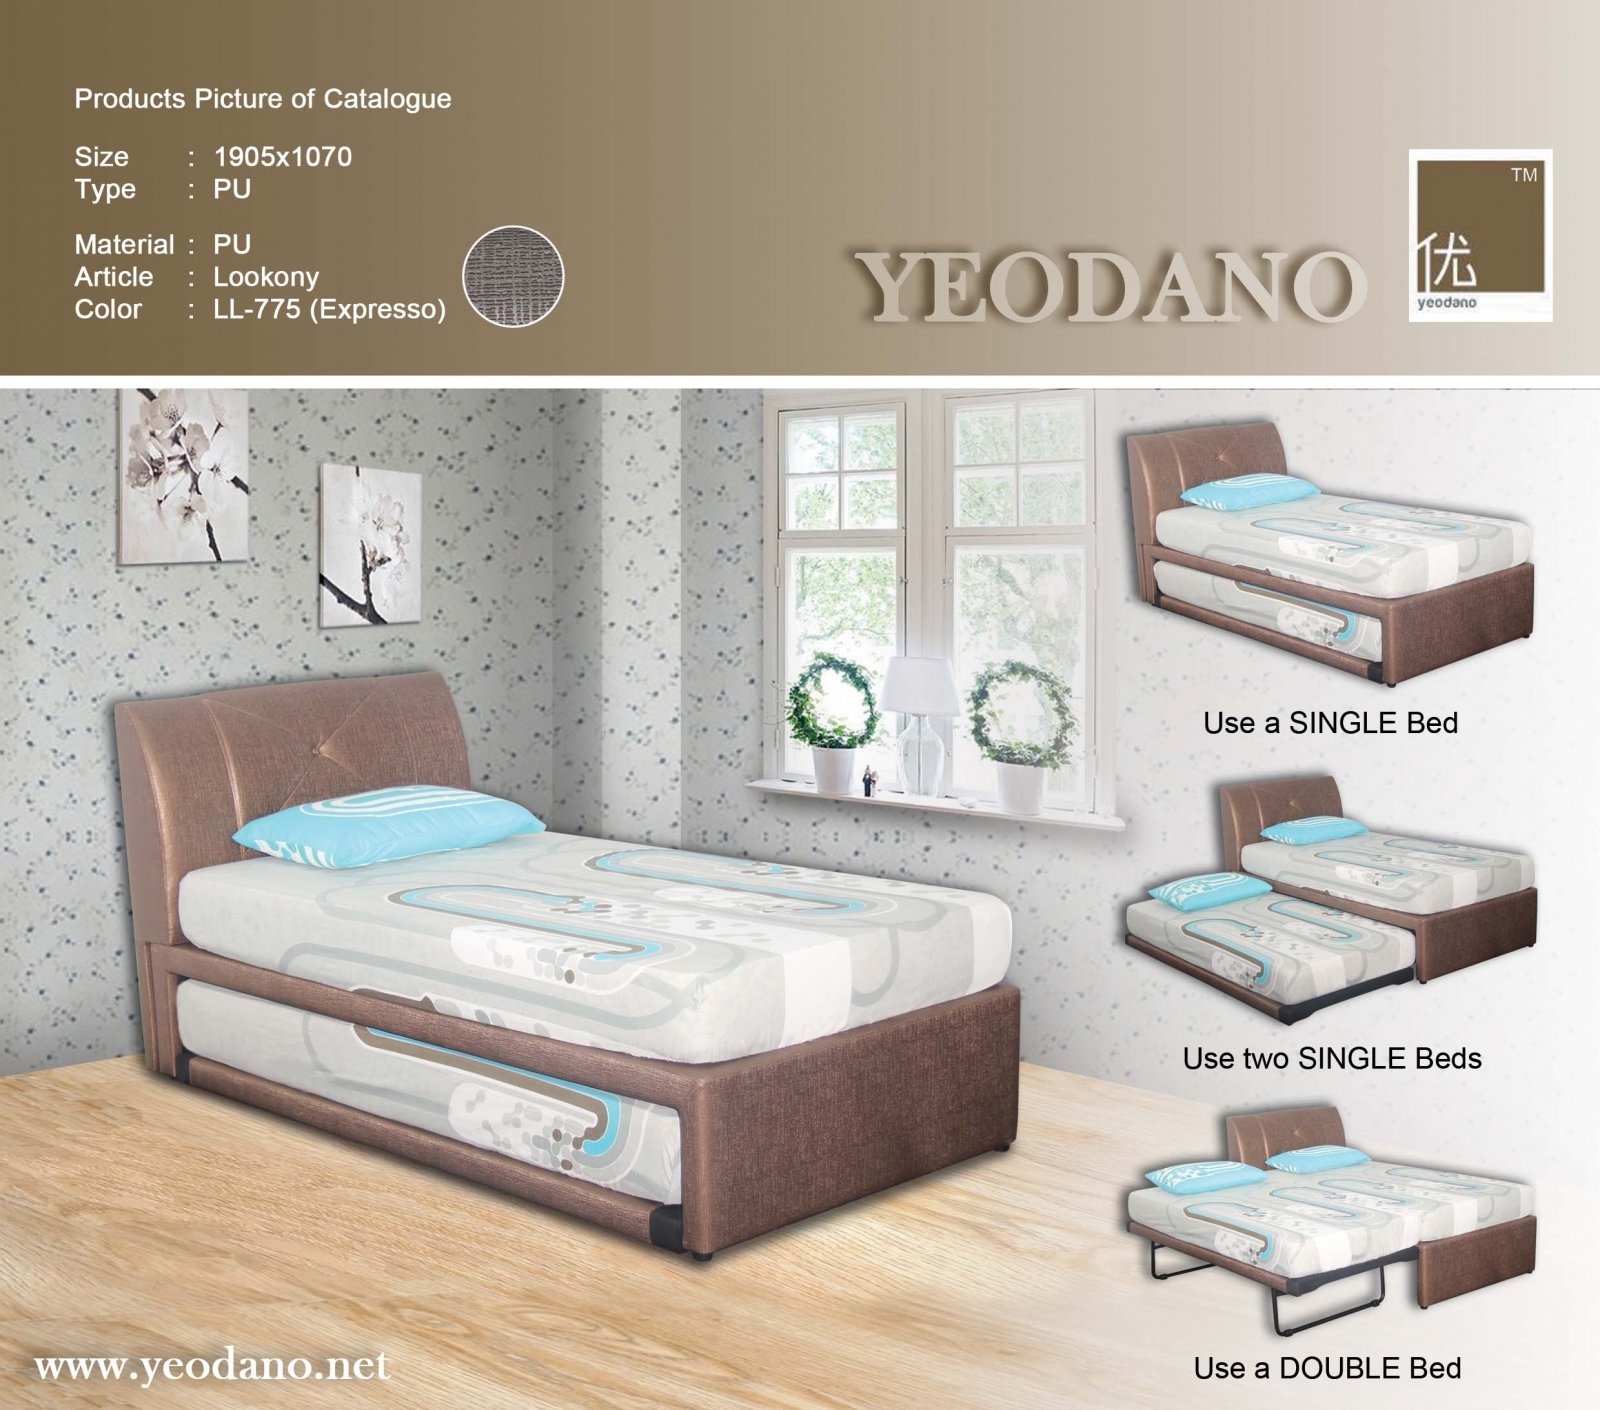 ND 621 - Pull Out Bed